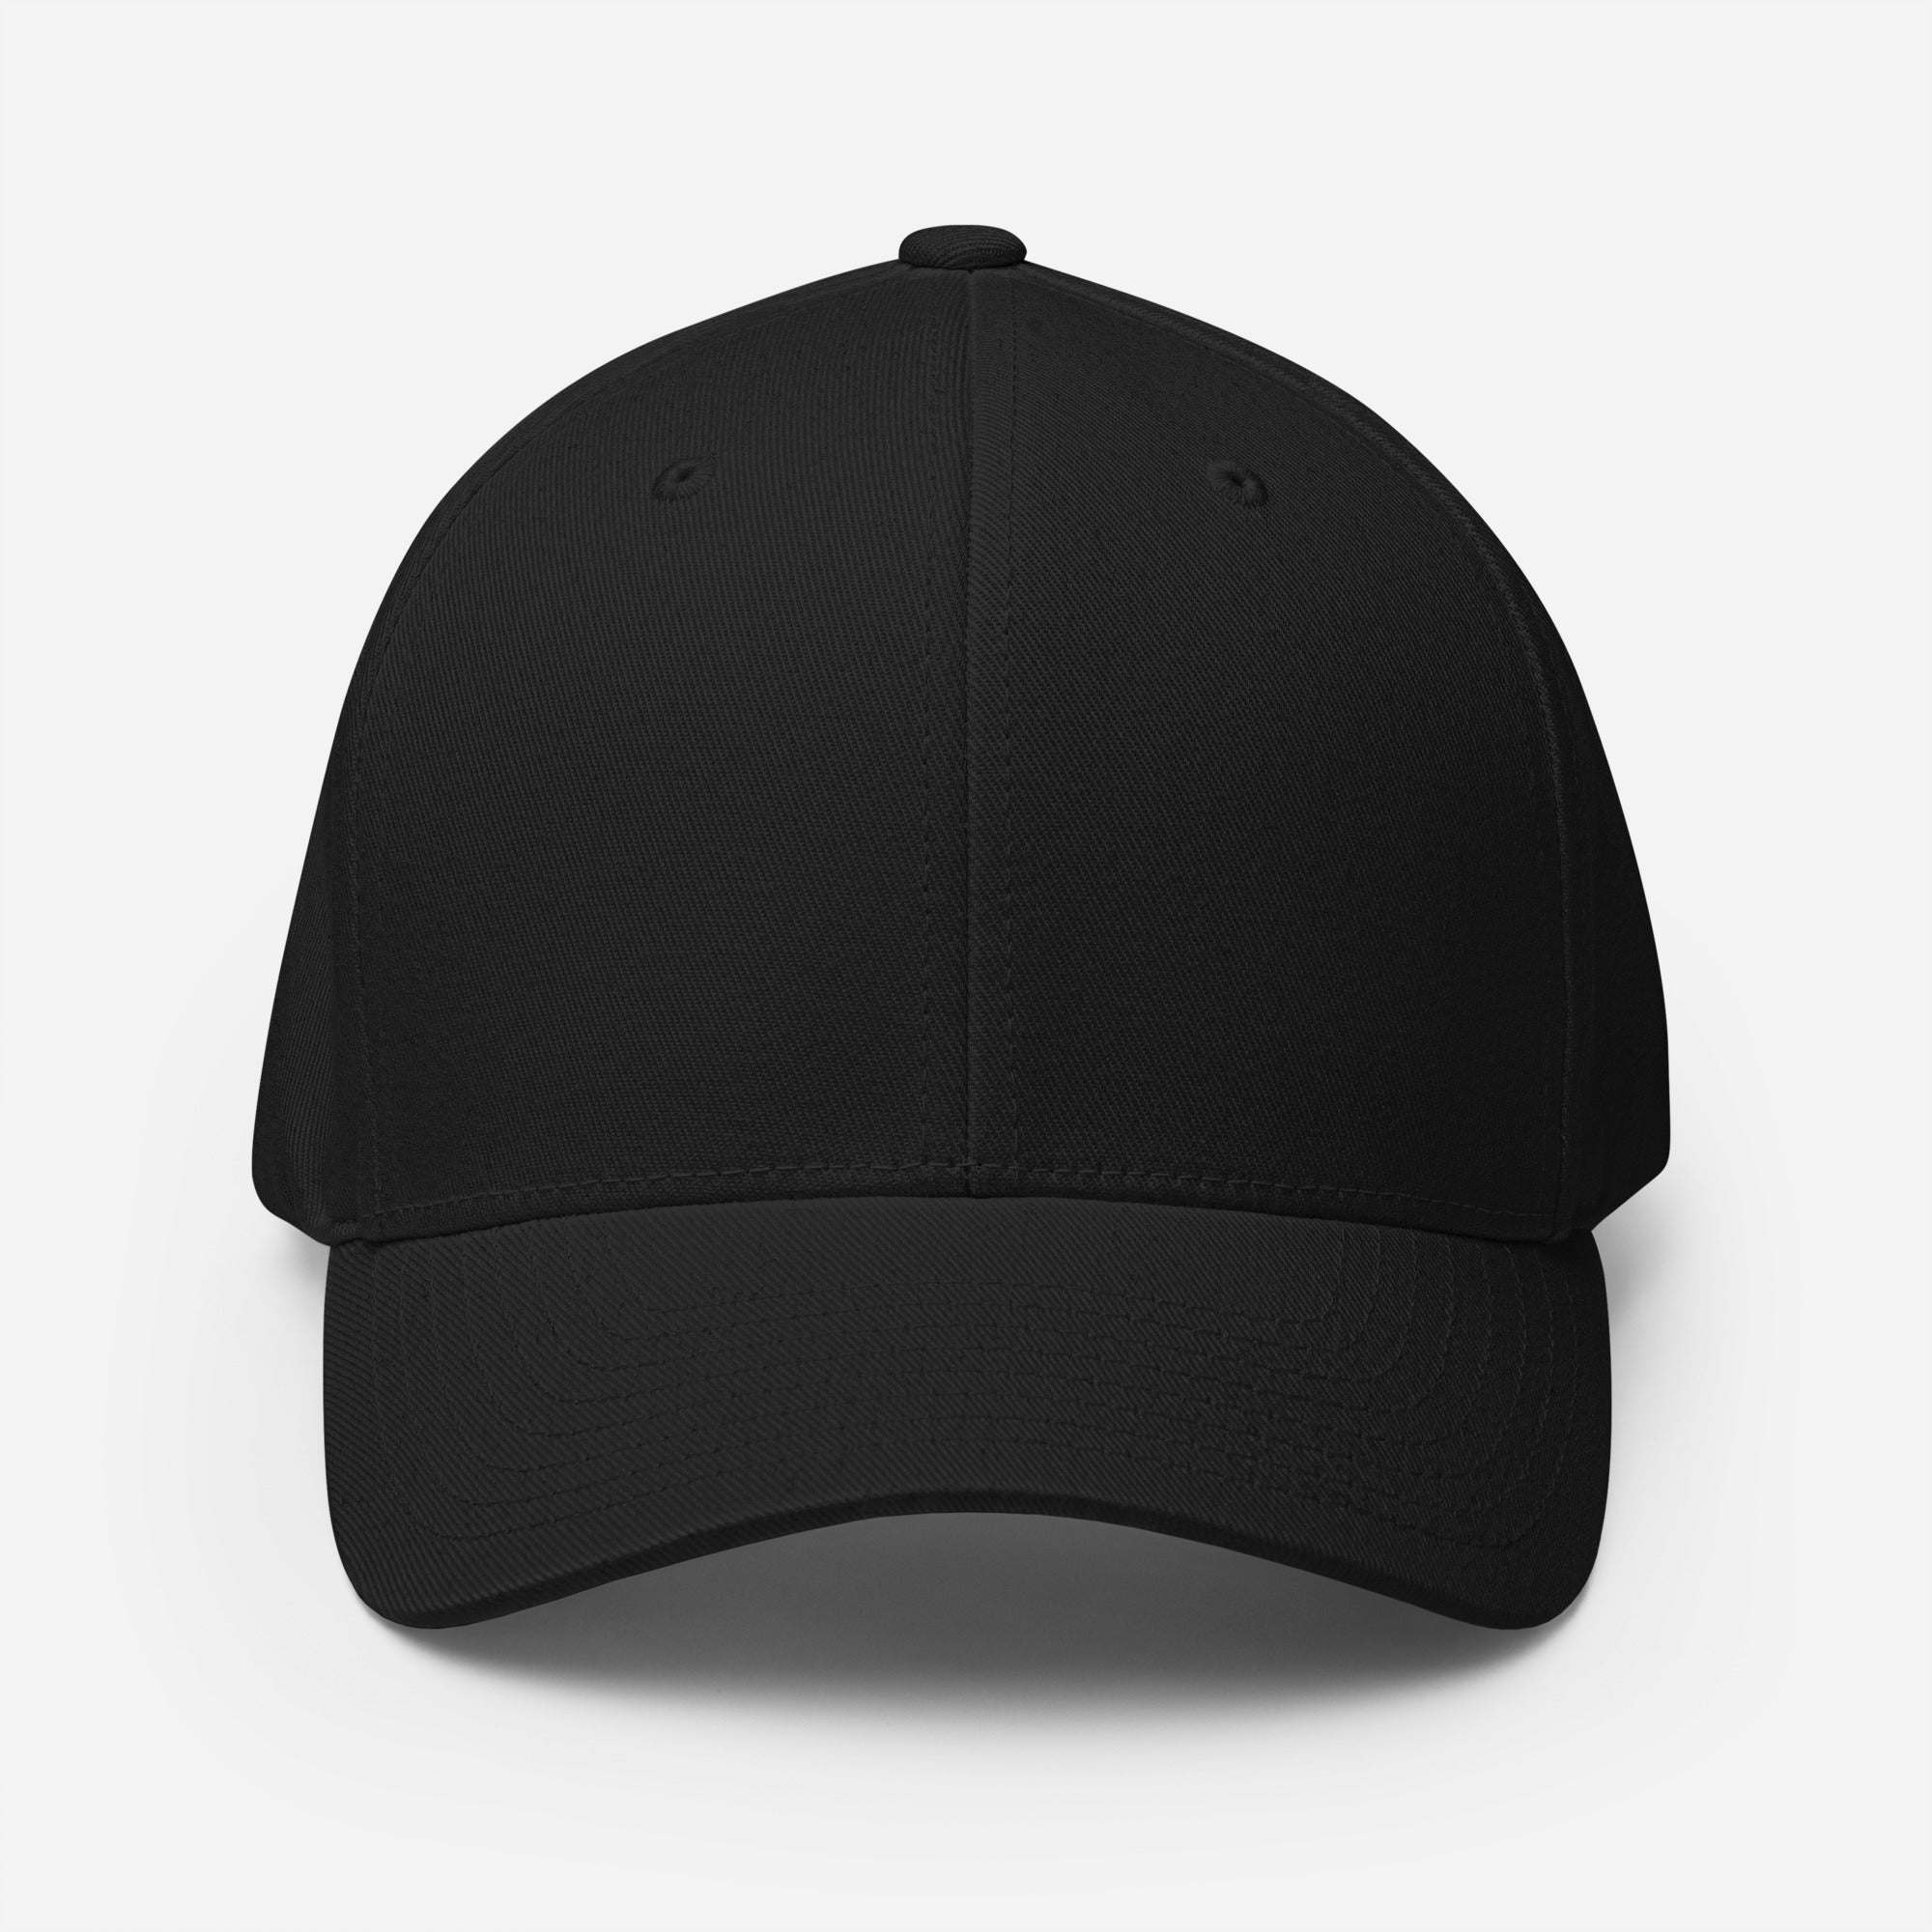 ONLY THE STRONG FLEX FIT-  Twill Cap